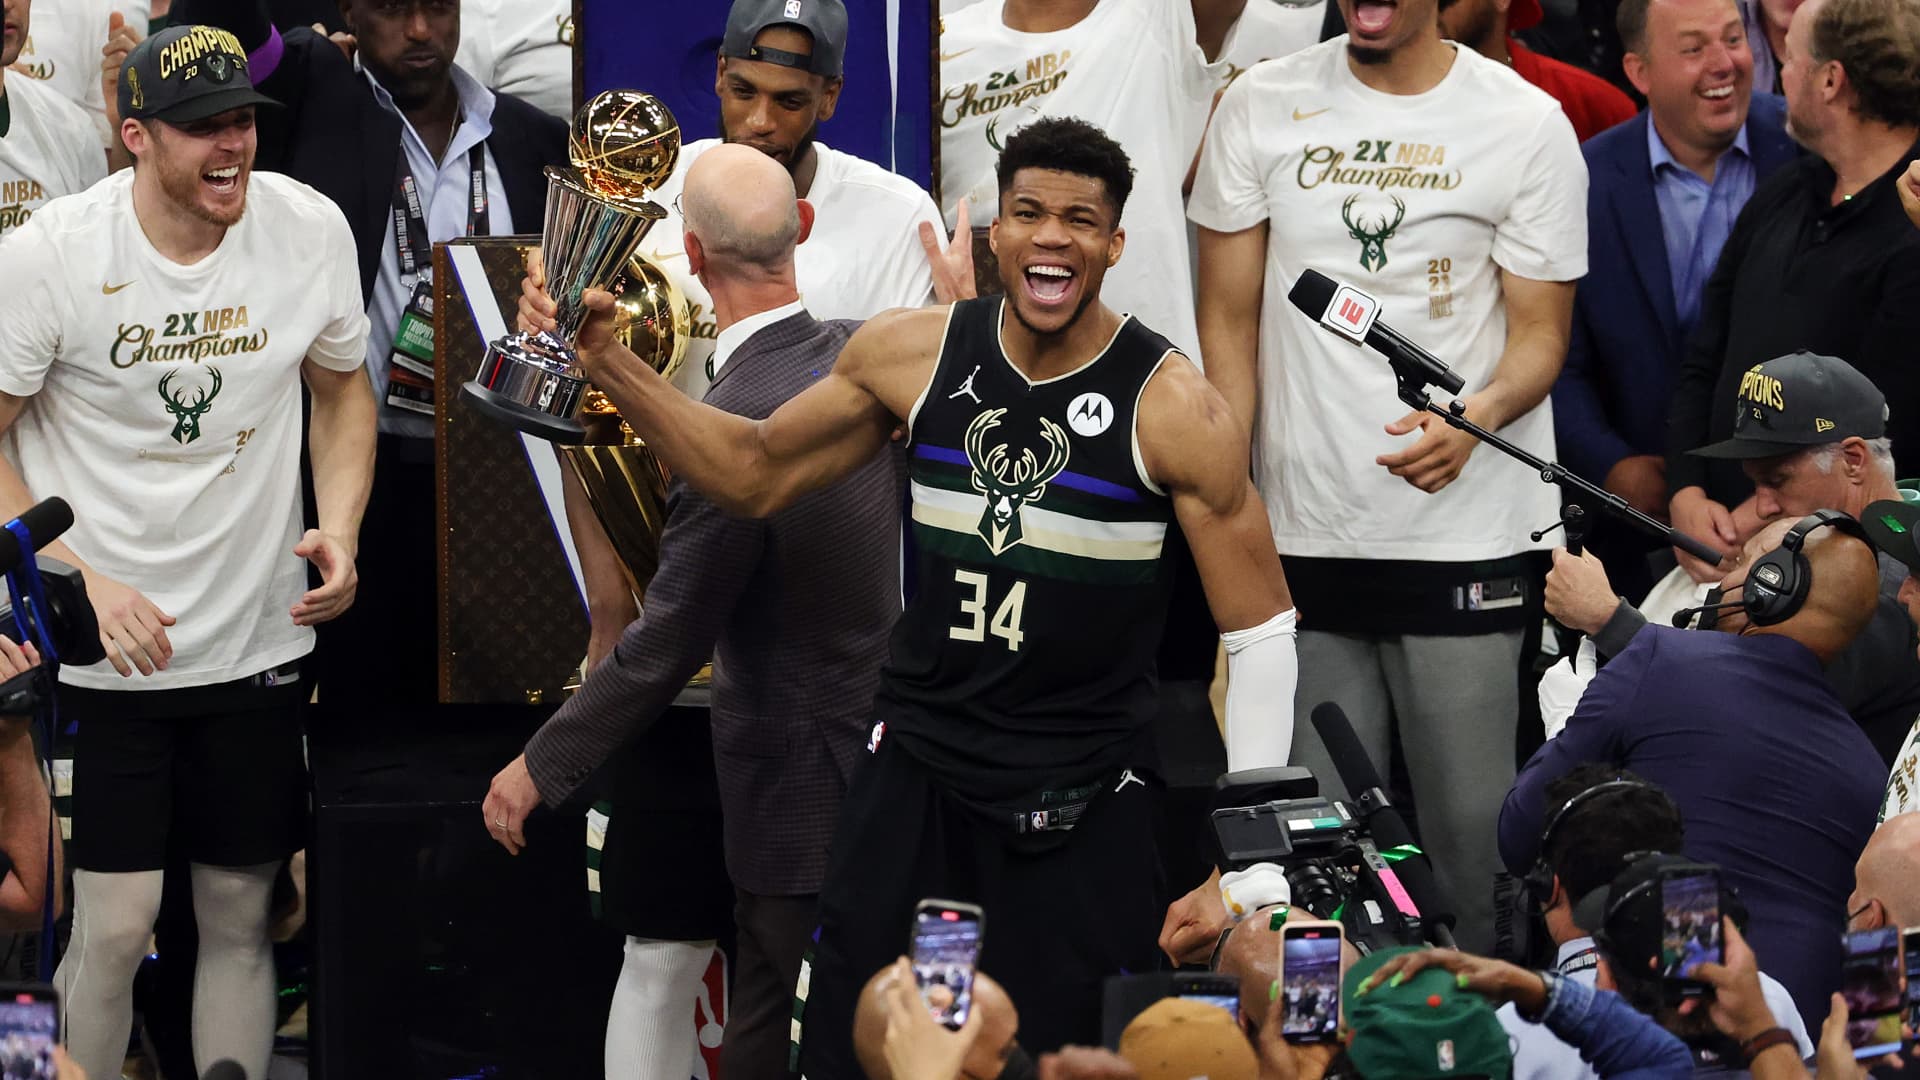 MILWAUKEE, WISCONSIN - JULY 20: Giannis Antetokounmpo #34 of the Milwaukee Bucks celebrates winning the Bill Russell NBA Finals MVP Award after defeating the Phoenix Suns in Game Six to win the 2021 NBA Finals at Fiserv Forum on July 20, 2021 in Milwaukee, Wisconsin. NOTE TO USER: User expressly acknowledges and agrees that, by downloading and or using this photograph, User is consenting to the terms and conditions of the Getty Images License Agreement.(Photo by Jonathan Daniel/Getty Images)